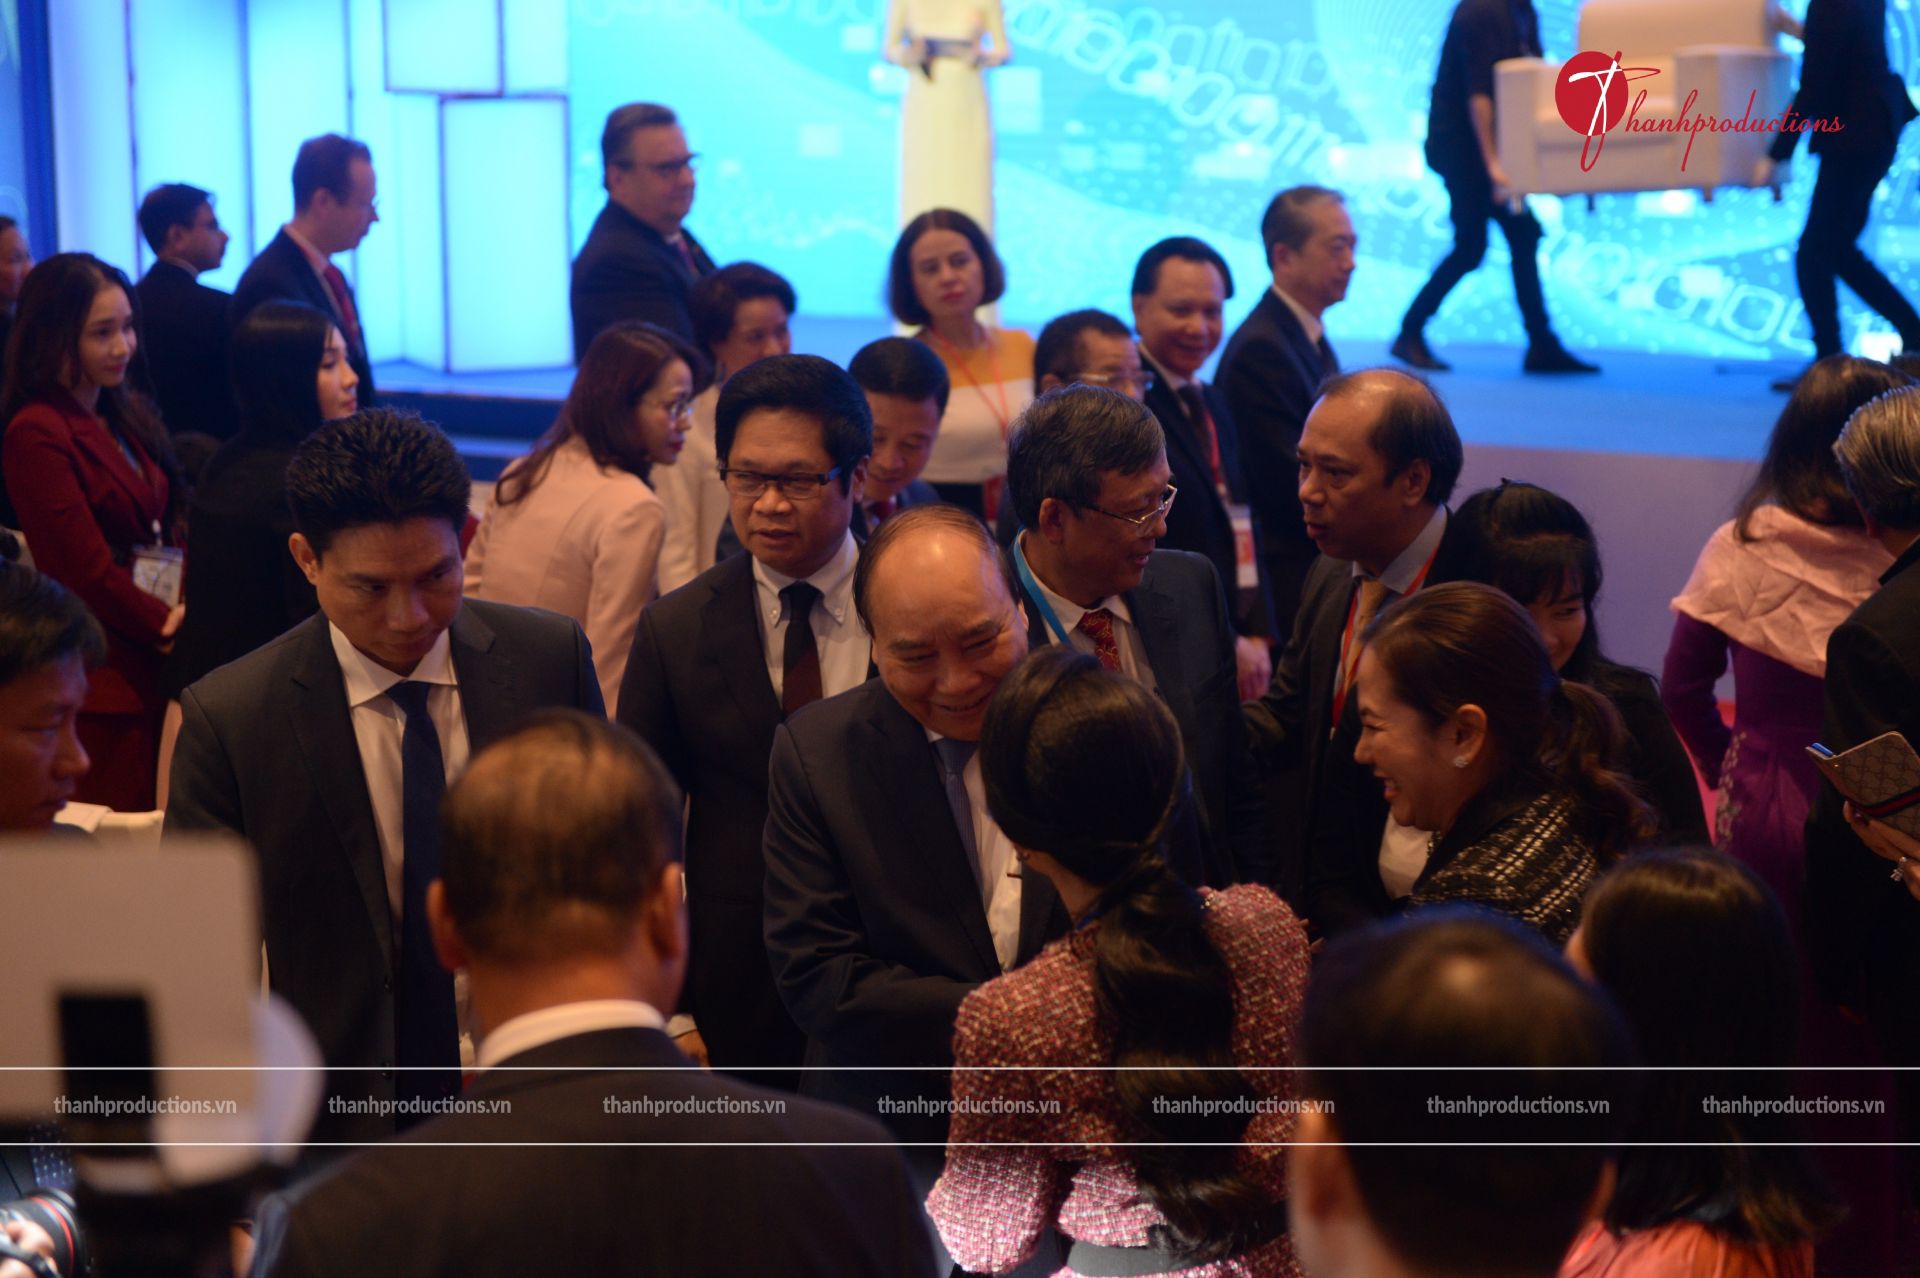 ASEAN BUSINESS AND INVESTMENT SUMMIT 2020